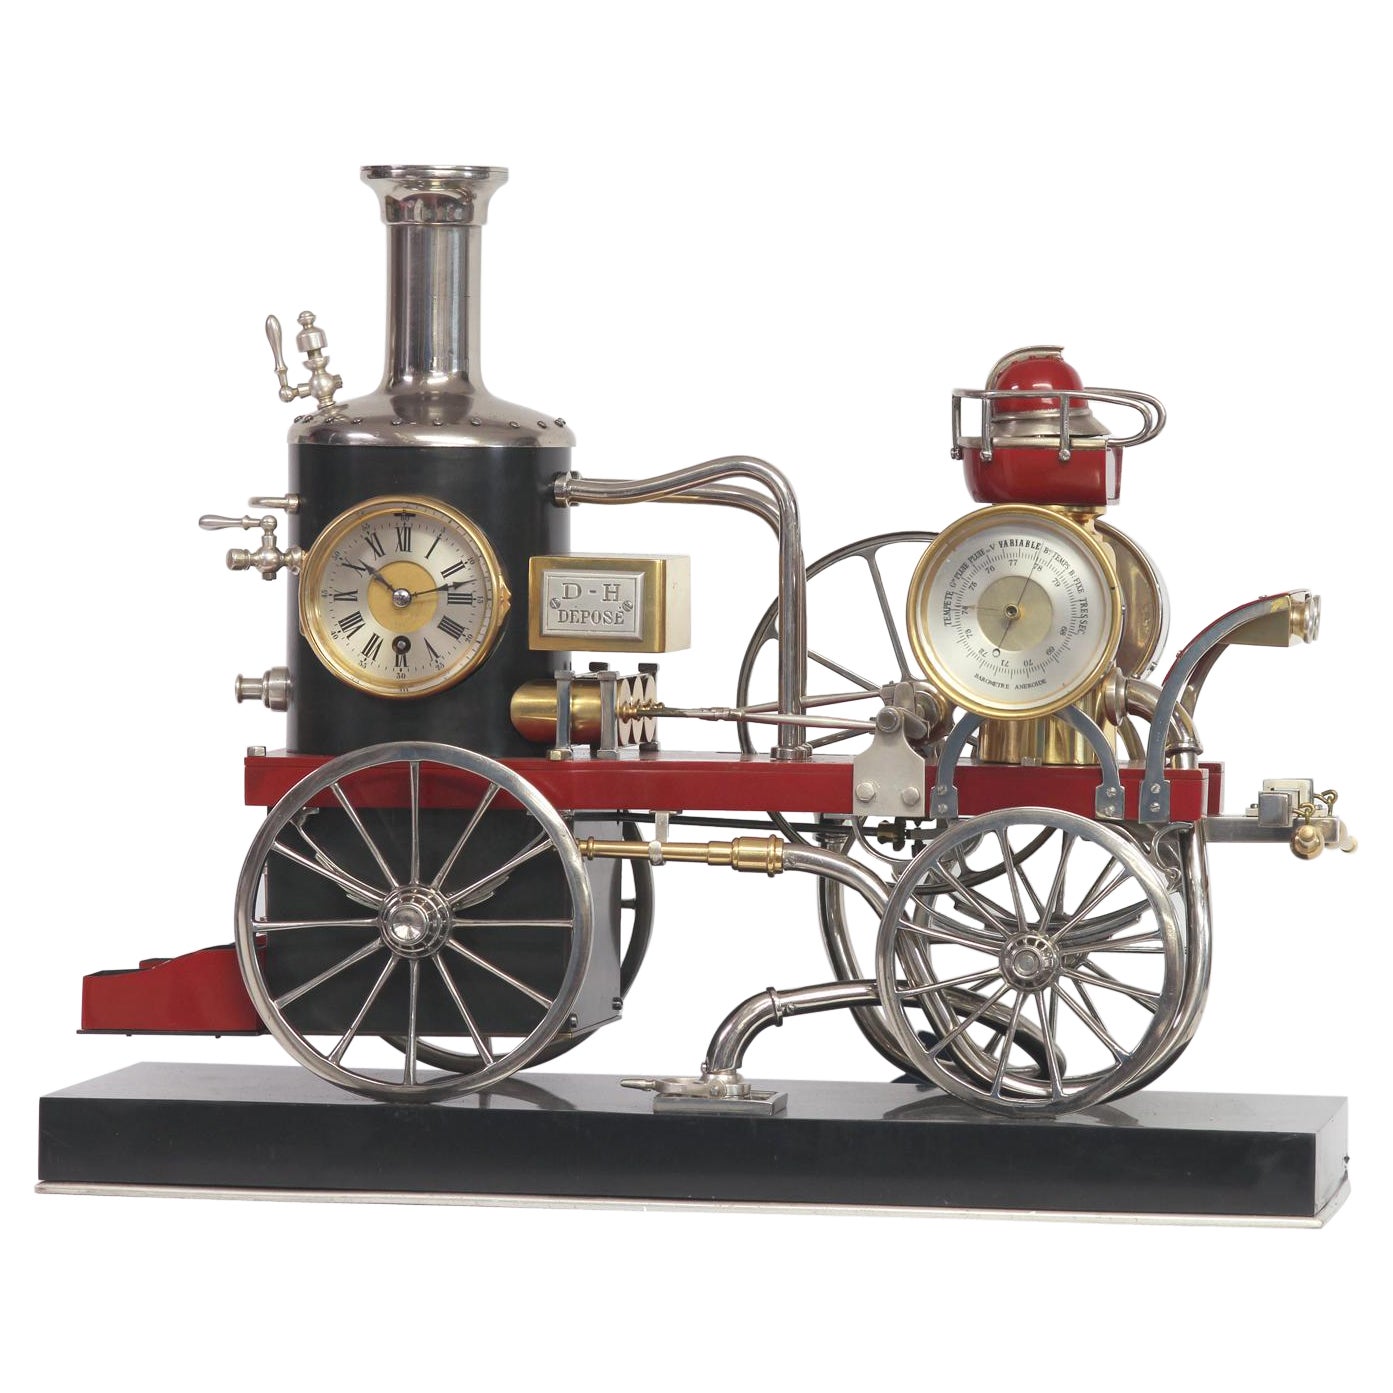 c.1900 French Industrial Fire Engine Clock